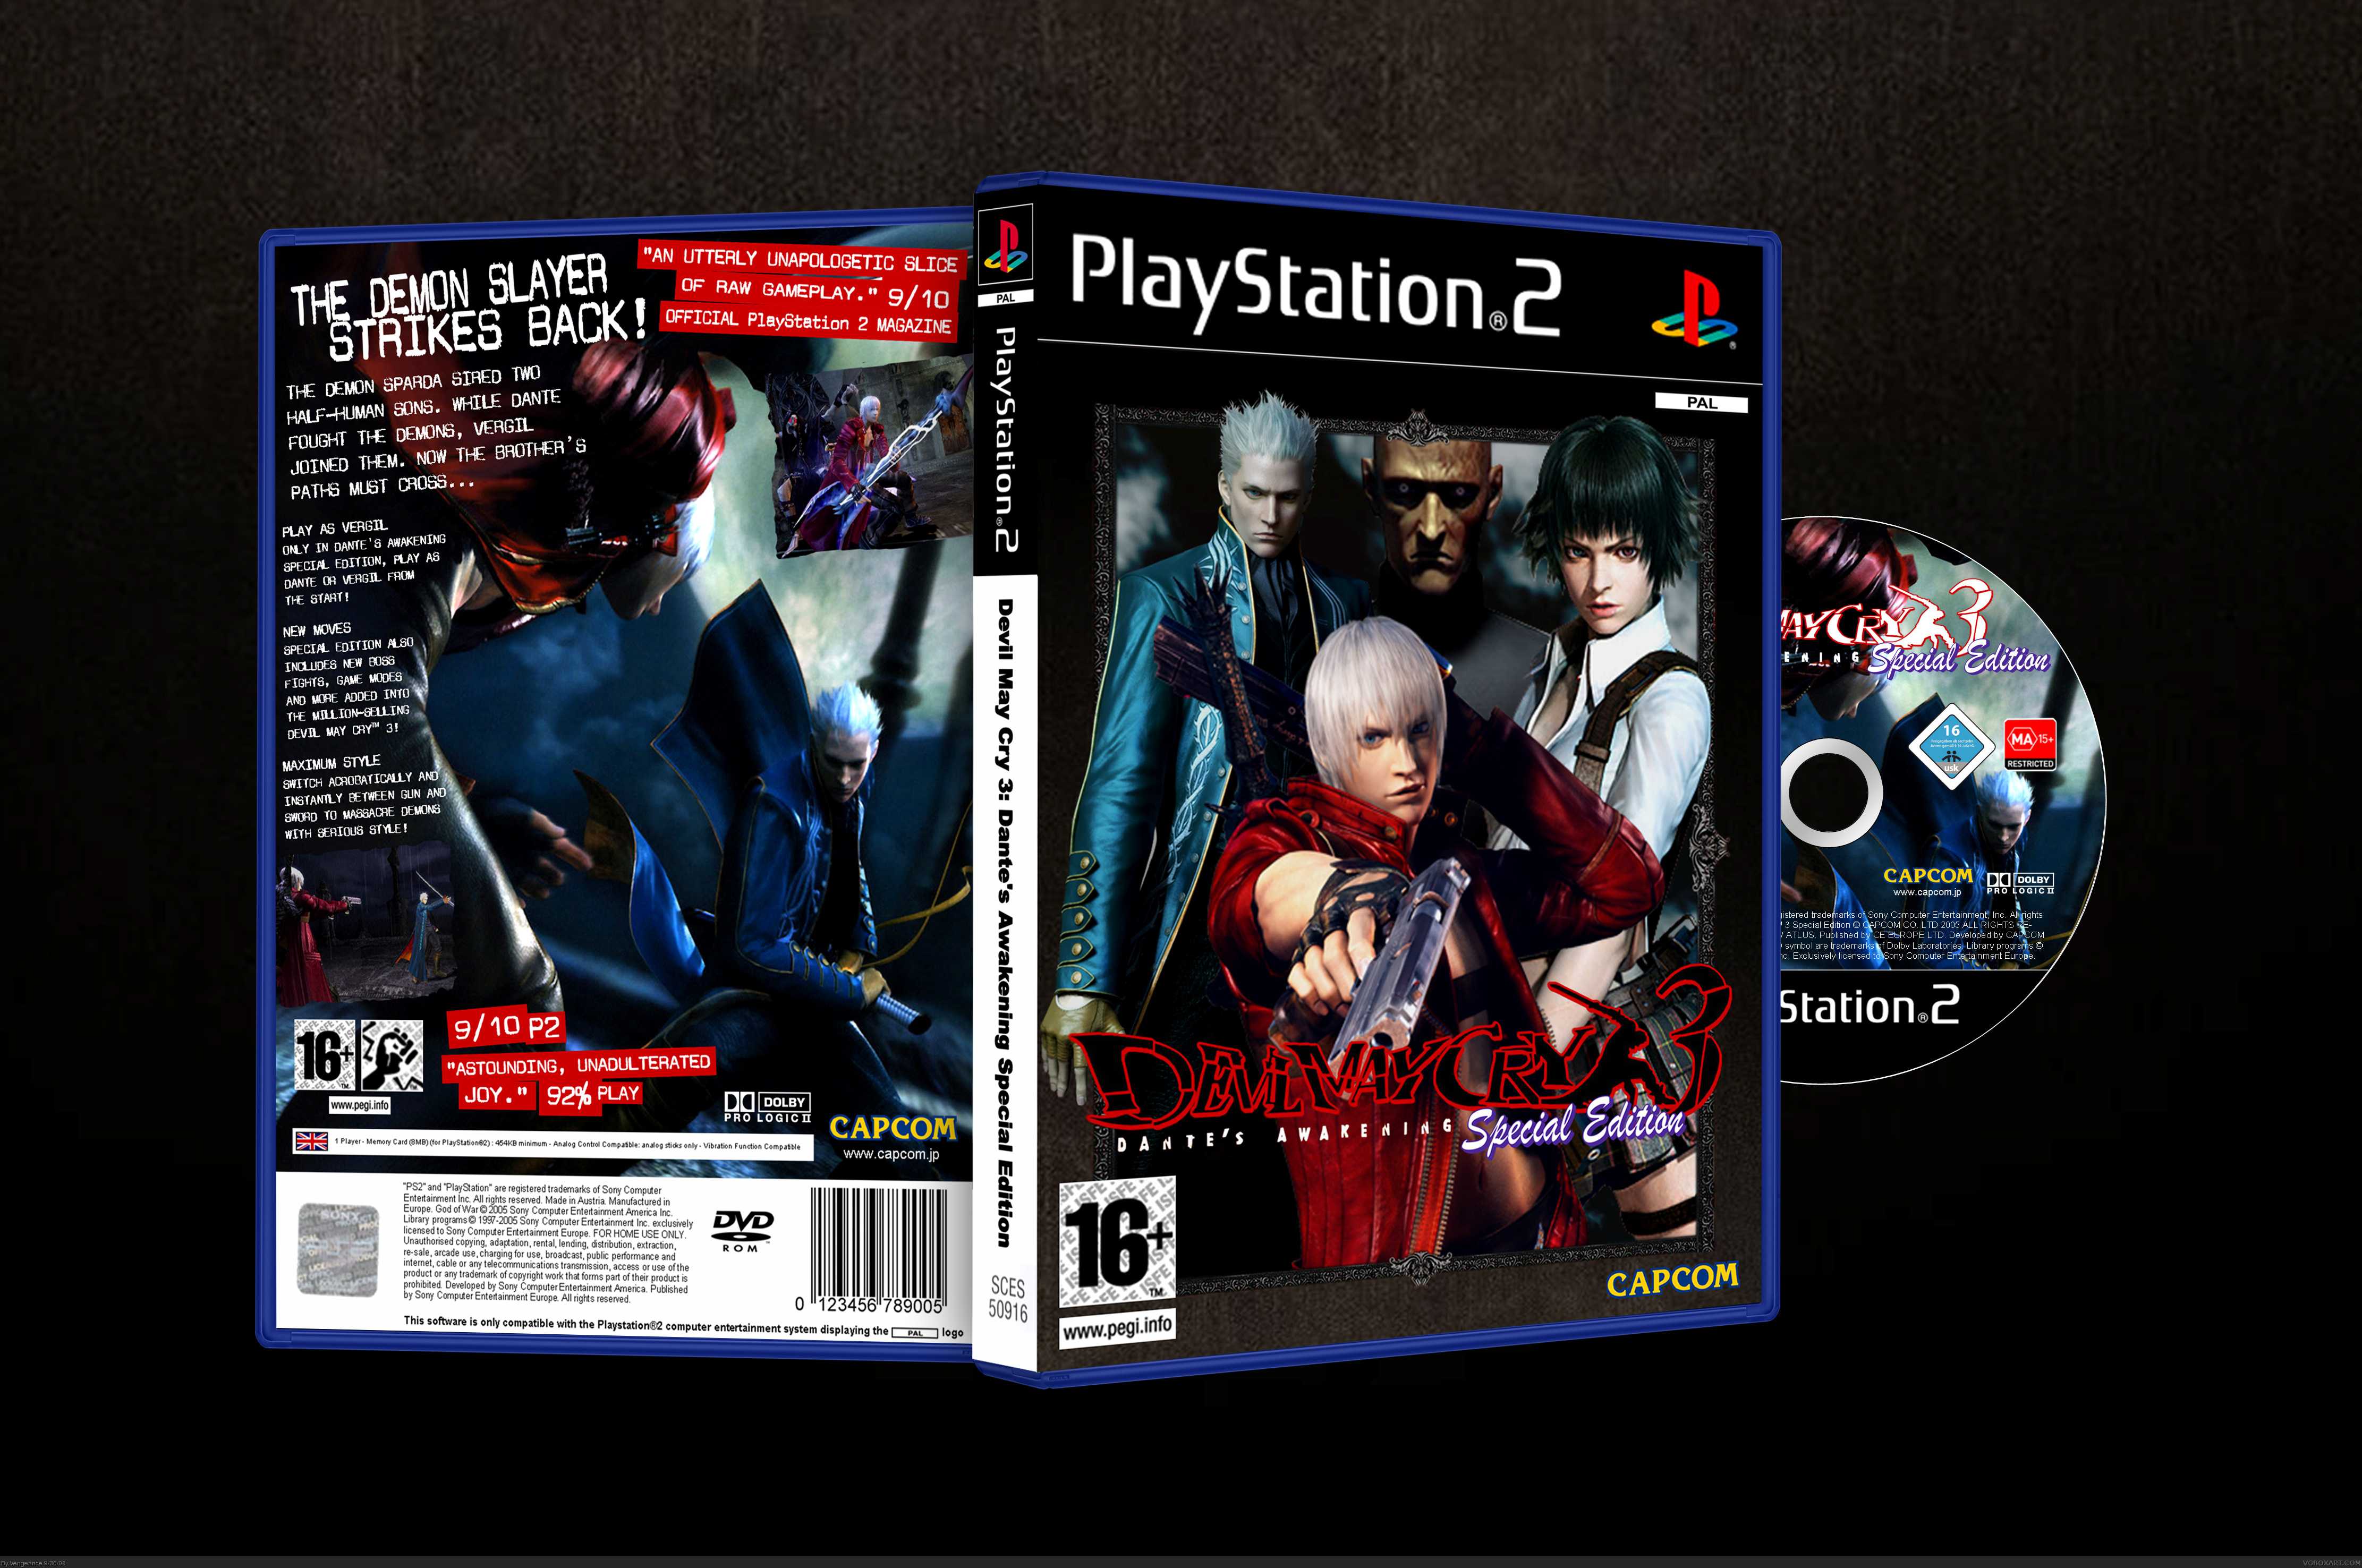 Devil May Cry 3 Special Edition box cover